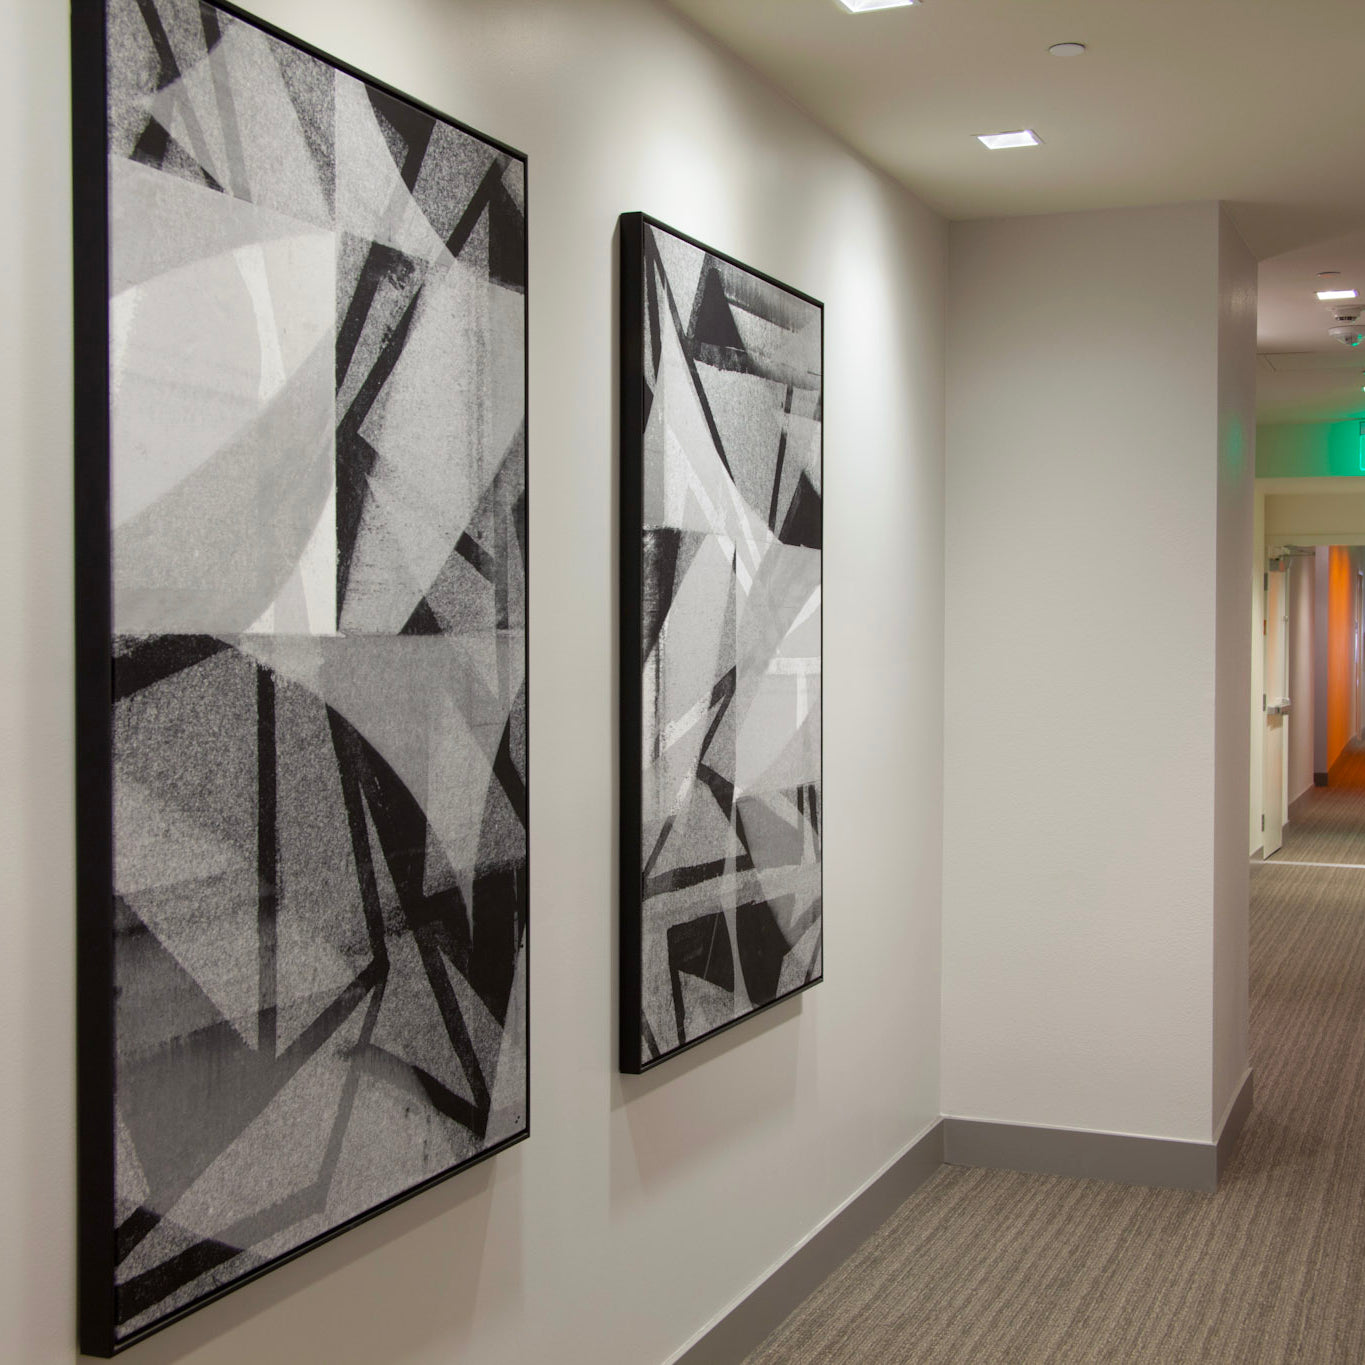 Hallway inside Alexan Aspect featuring bold geometric black and white canvases by WRAPPED Studios, complementing the upscale interior design.